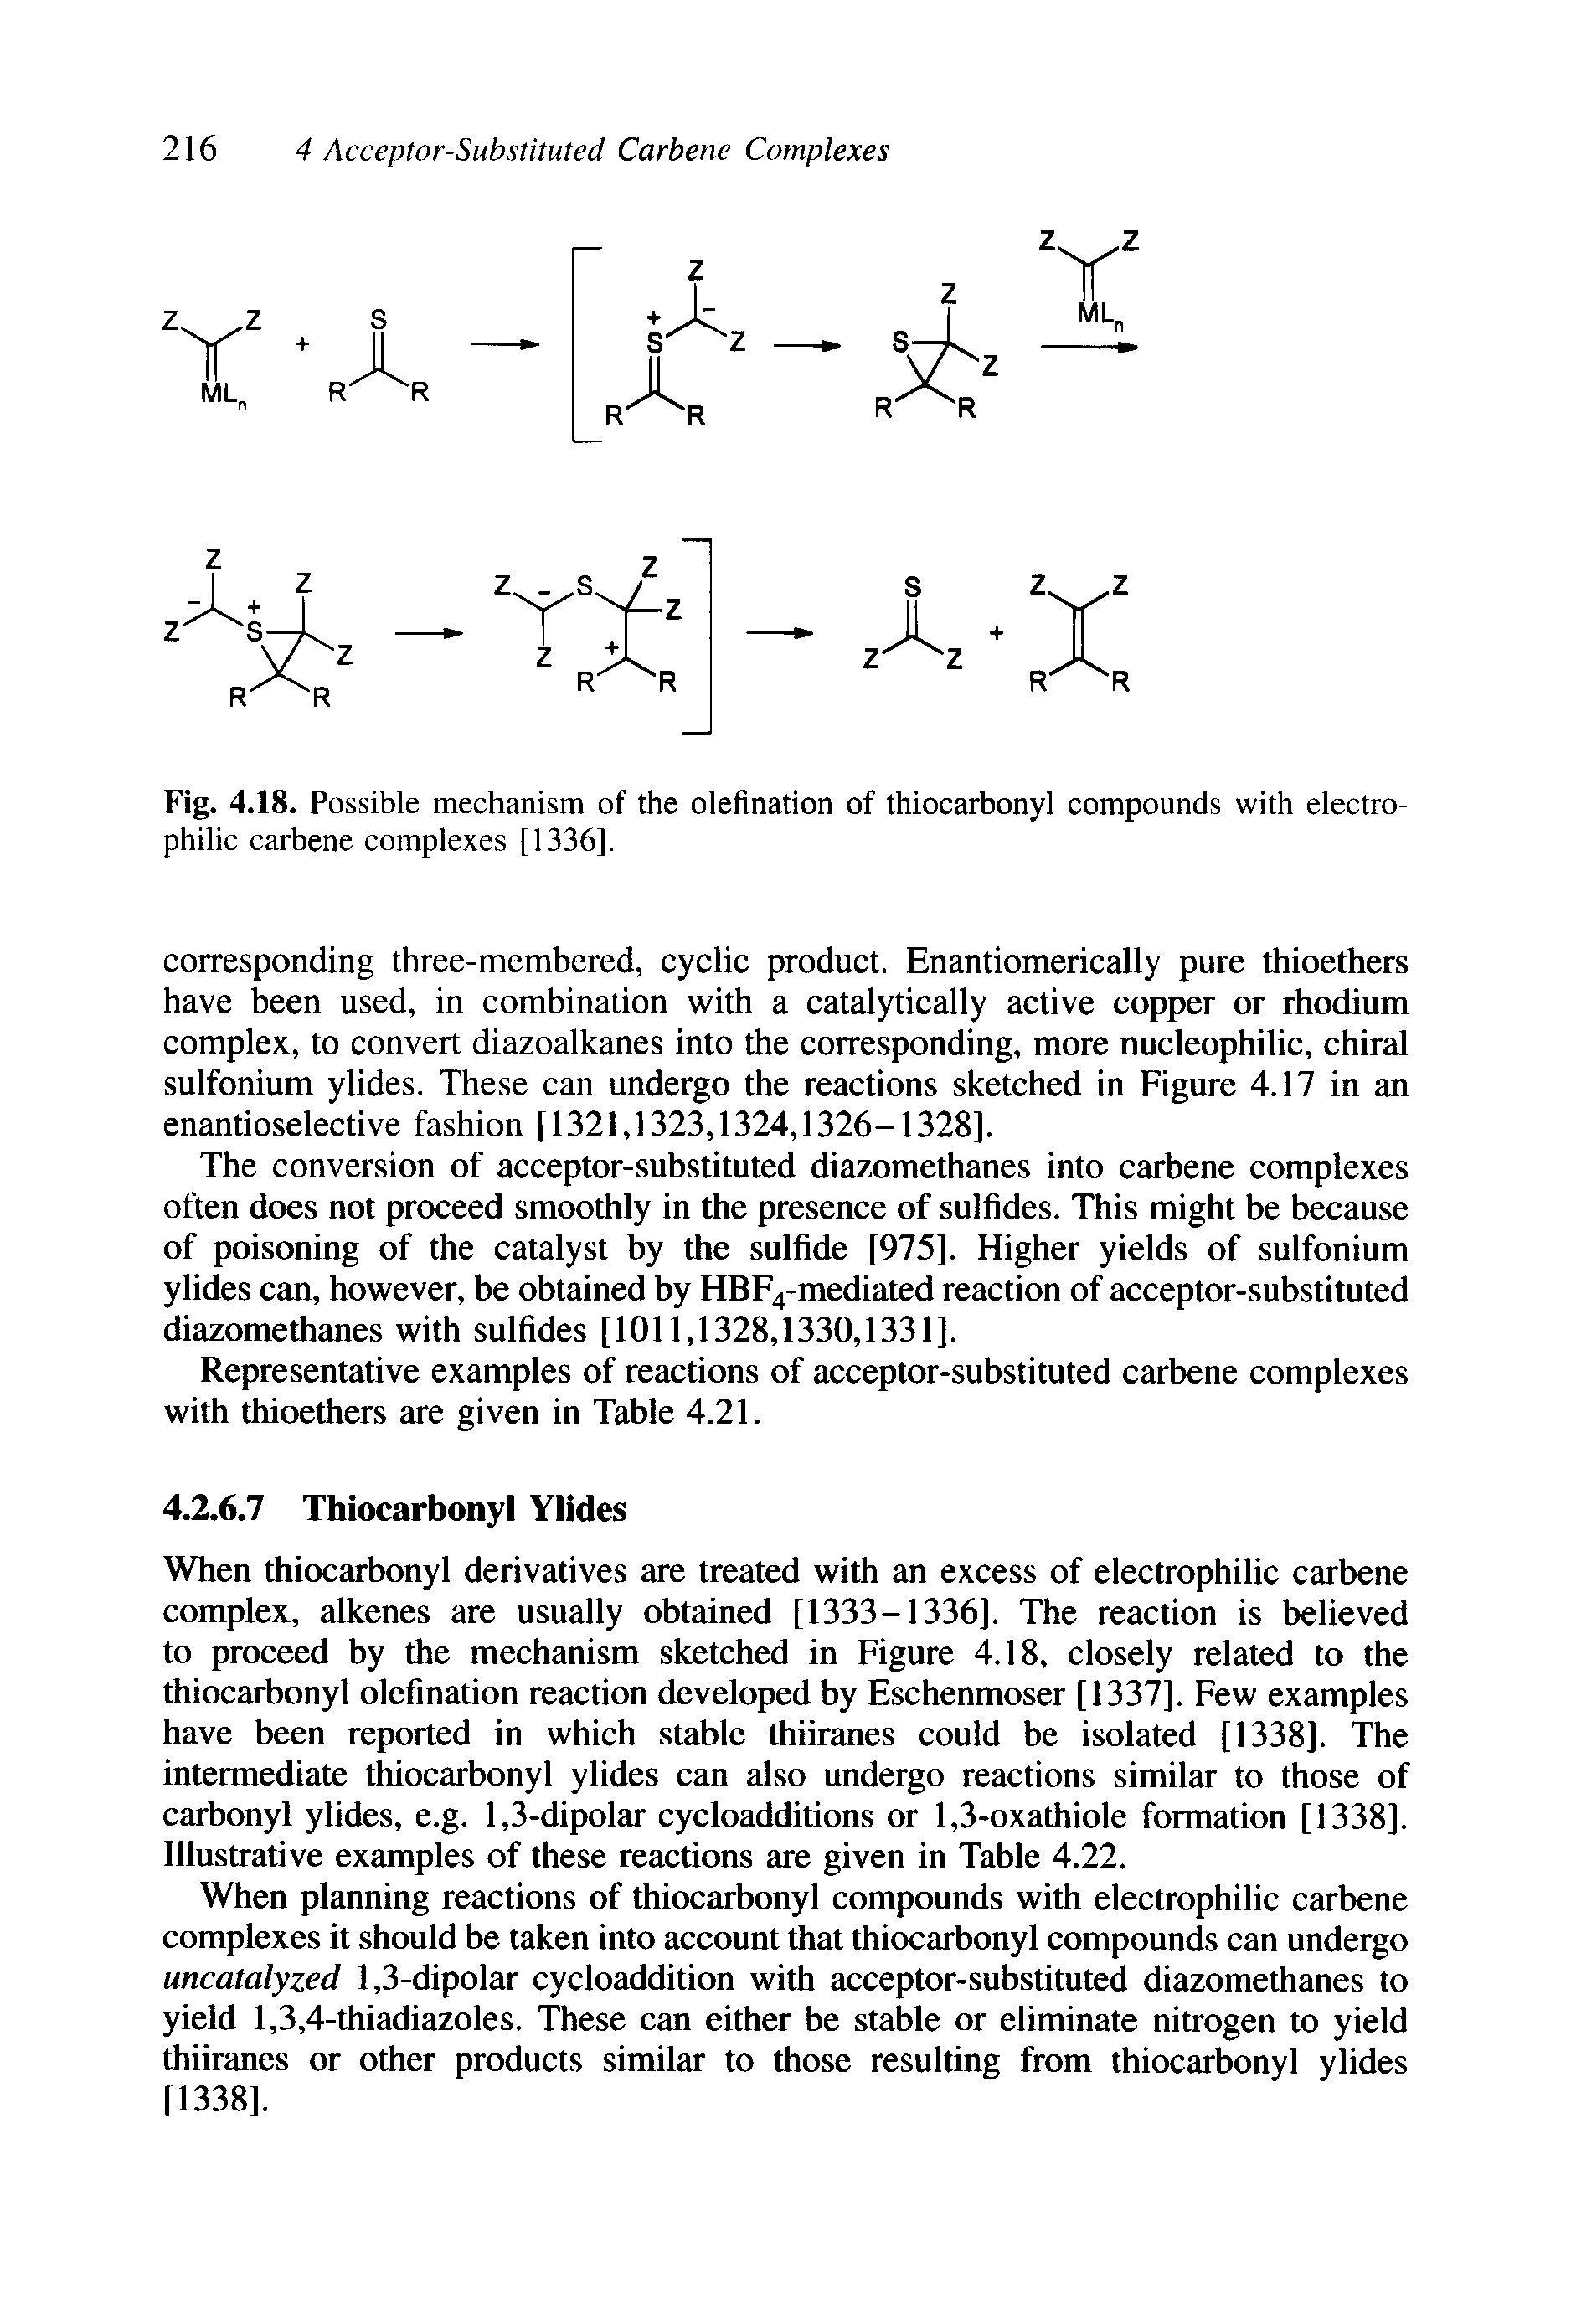 Fig. 4.18. Possible mechanism of the olefination of thiocarbonyl compounds with electrophilic carhene complexes [1336].